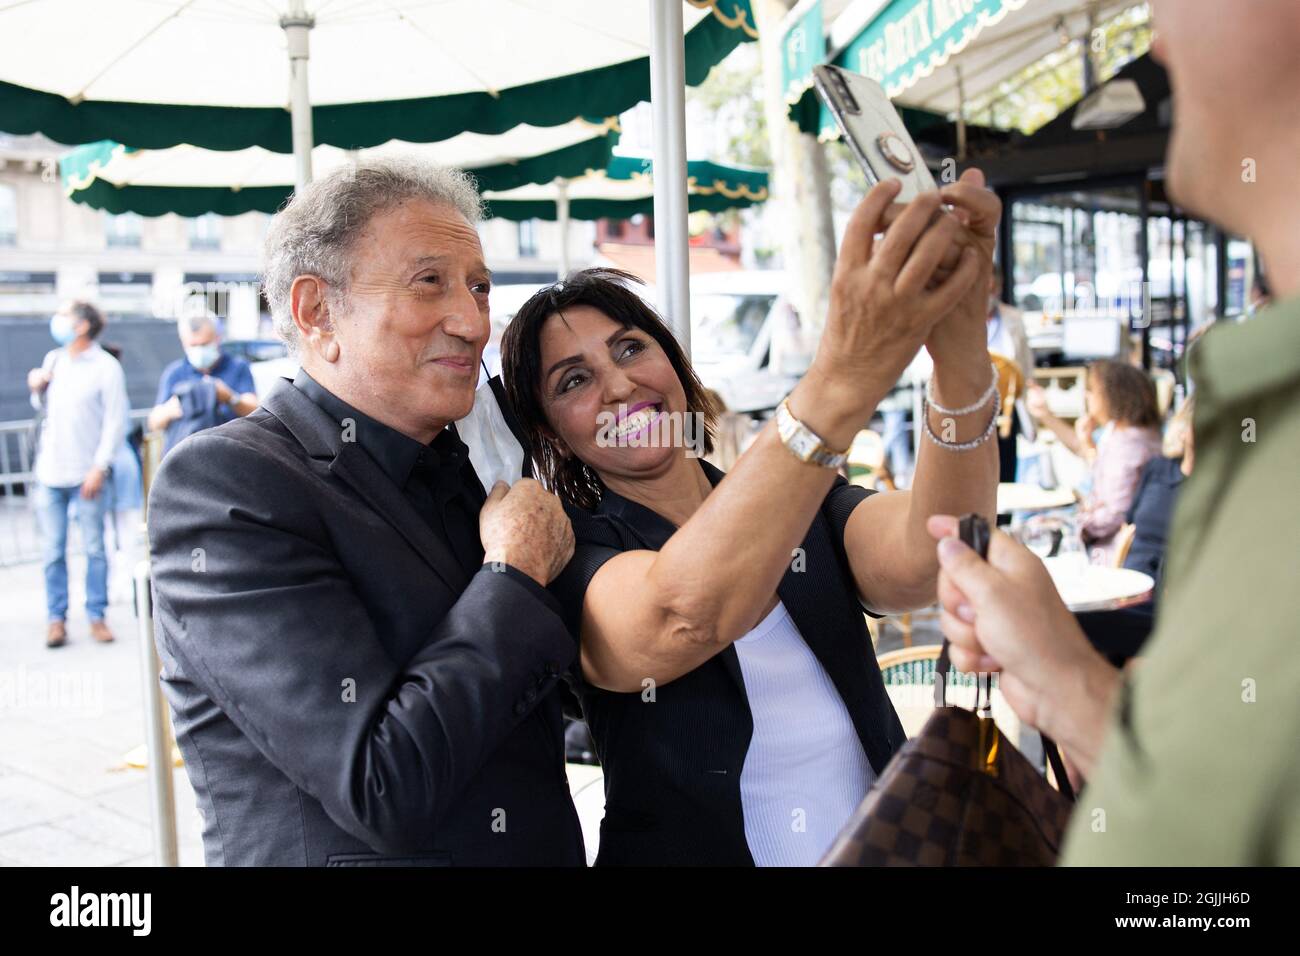 Tv presentator Michel Drucker take pictures with fan as he leaves after the  funeral ceremony for late French actor Jean-Paul Belmondo at the  Saint-Germain-des-Pres church in Paris on September 10, 2021. Several